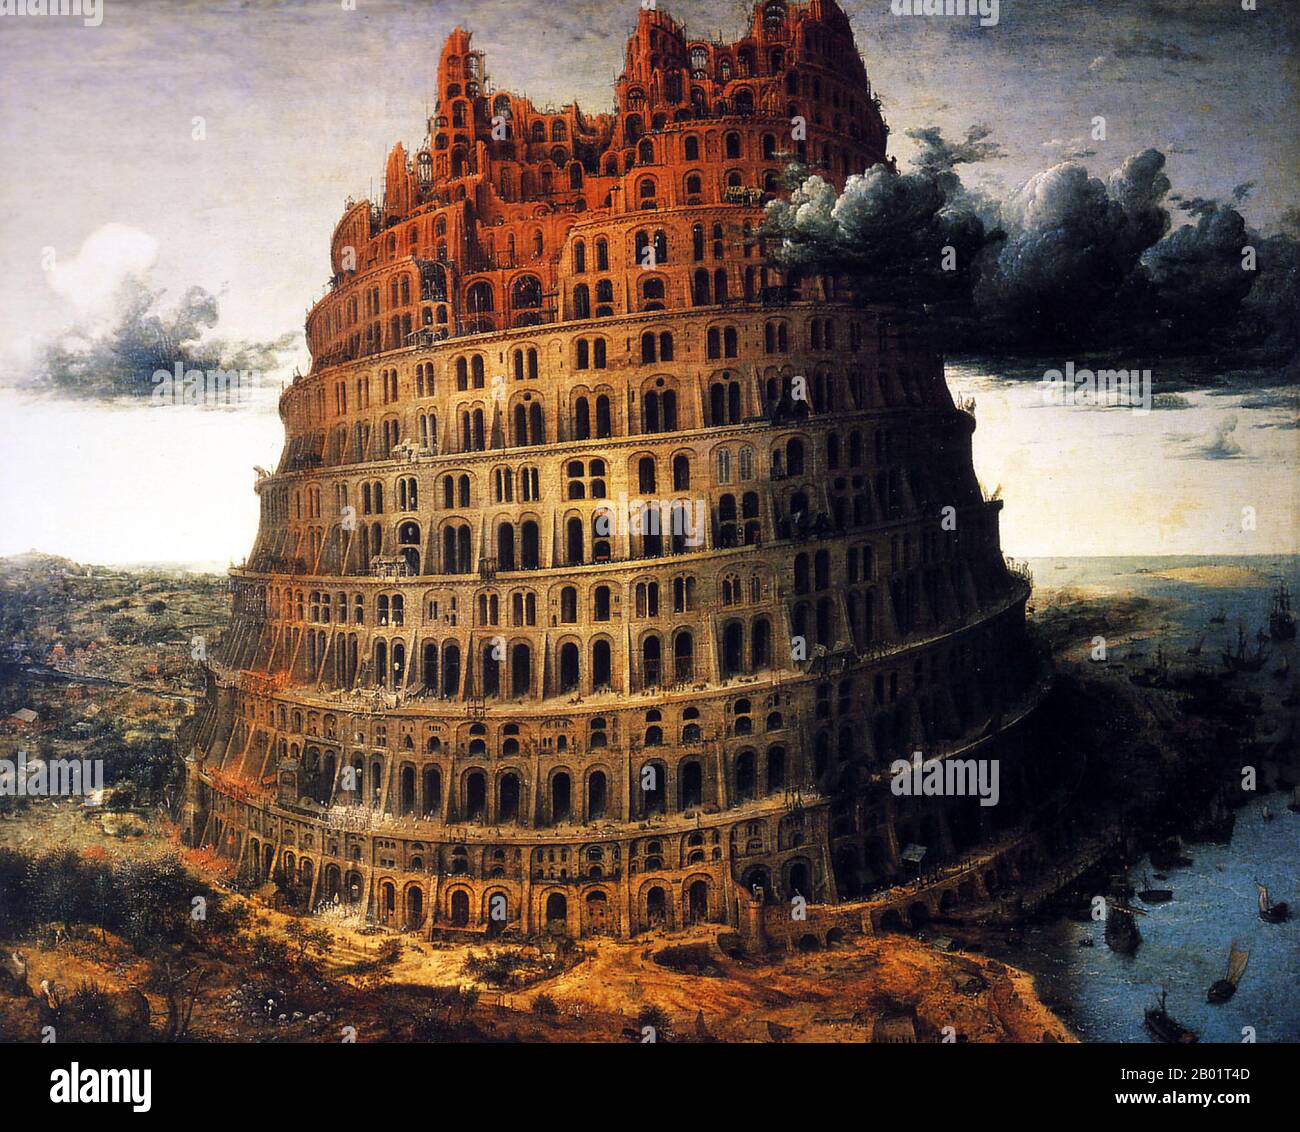 Belgium/Iraq/Mesopotamia: 'The Building of the Tower of Babel'. Oil on wood painting by Pieter Bruegel the Elder (1526 - 9 September 1569), 1568.  The Tower of Babel, according to the Book of Genesis, was an enormous tower built in the plain of Shinar.  According to the biblical account, a united humanity of the generations following the Great Flood, speaking a single language and migrating from the east, came to the land of Shinar, where they resolved to build a city with a tower 'with its top in the heavens...lest we be scattered abroad upon the face of the Earth'. Stock Photo